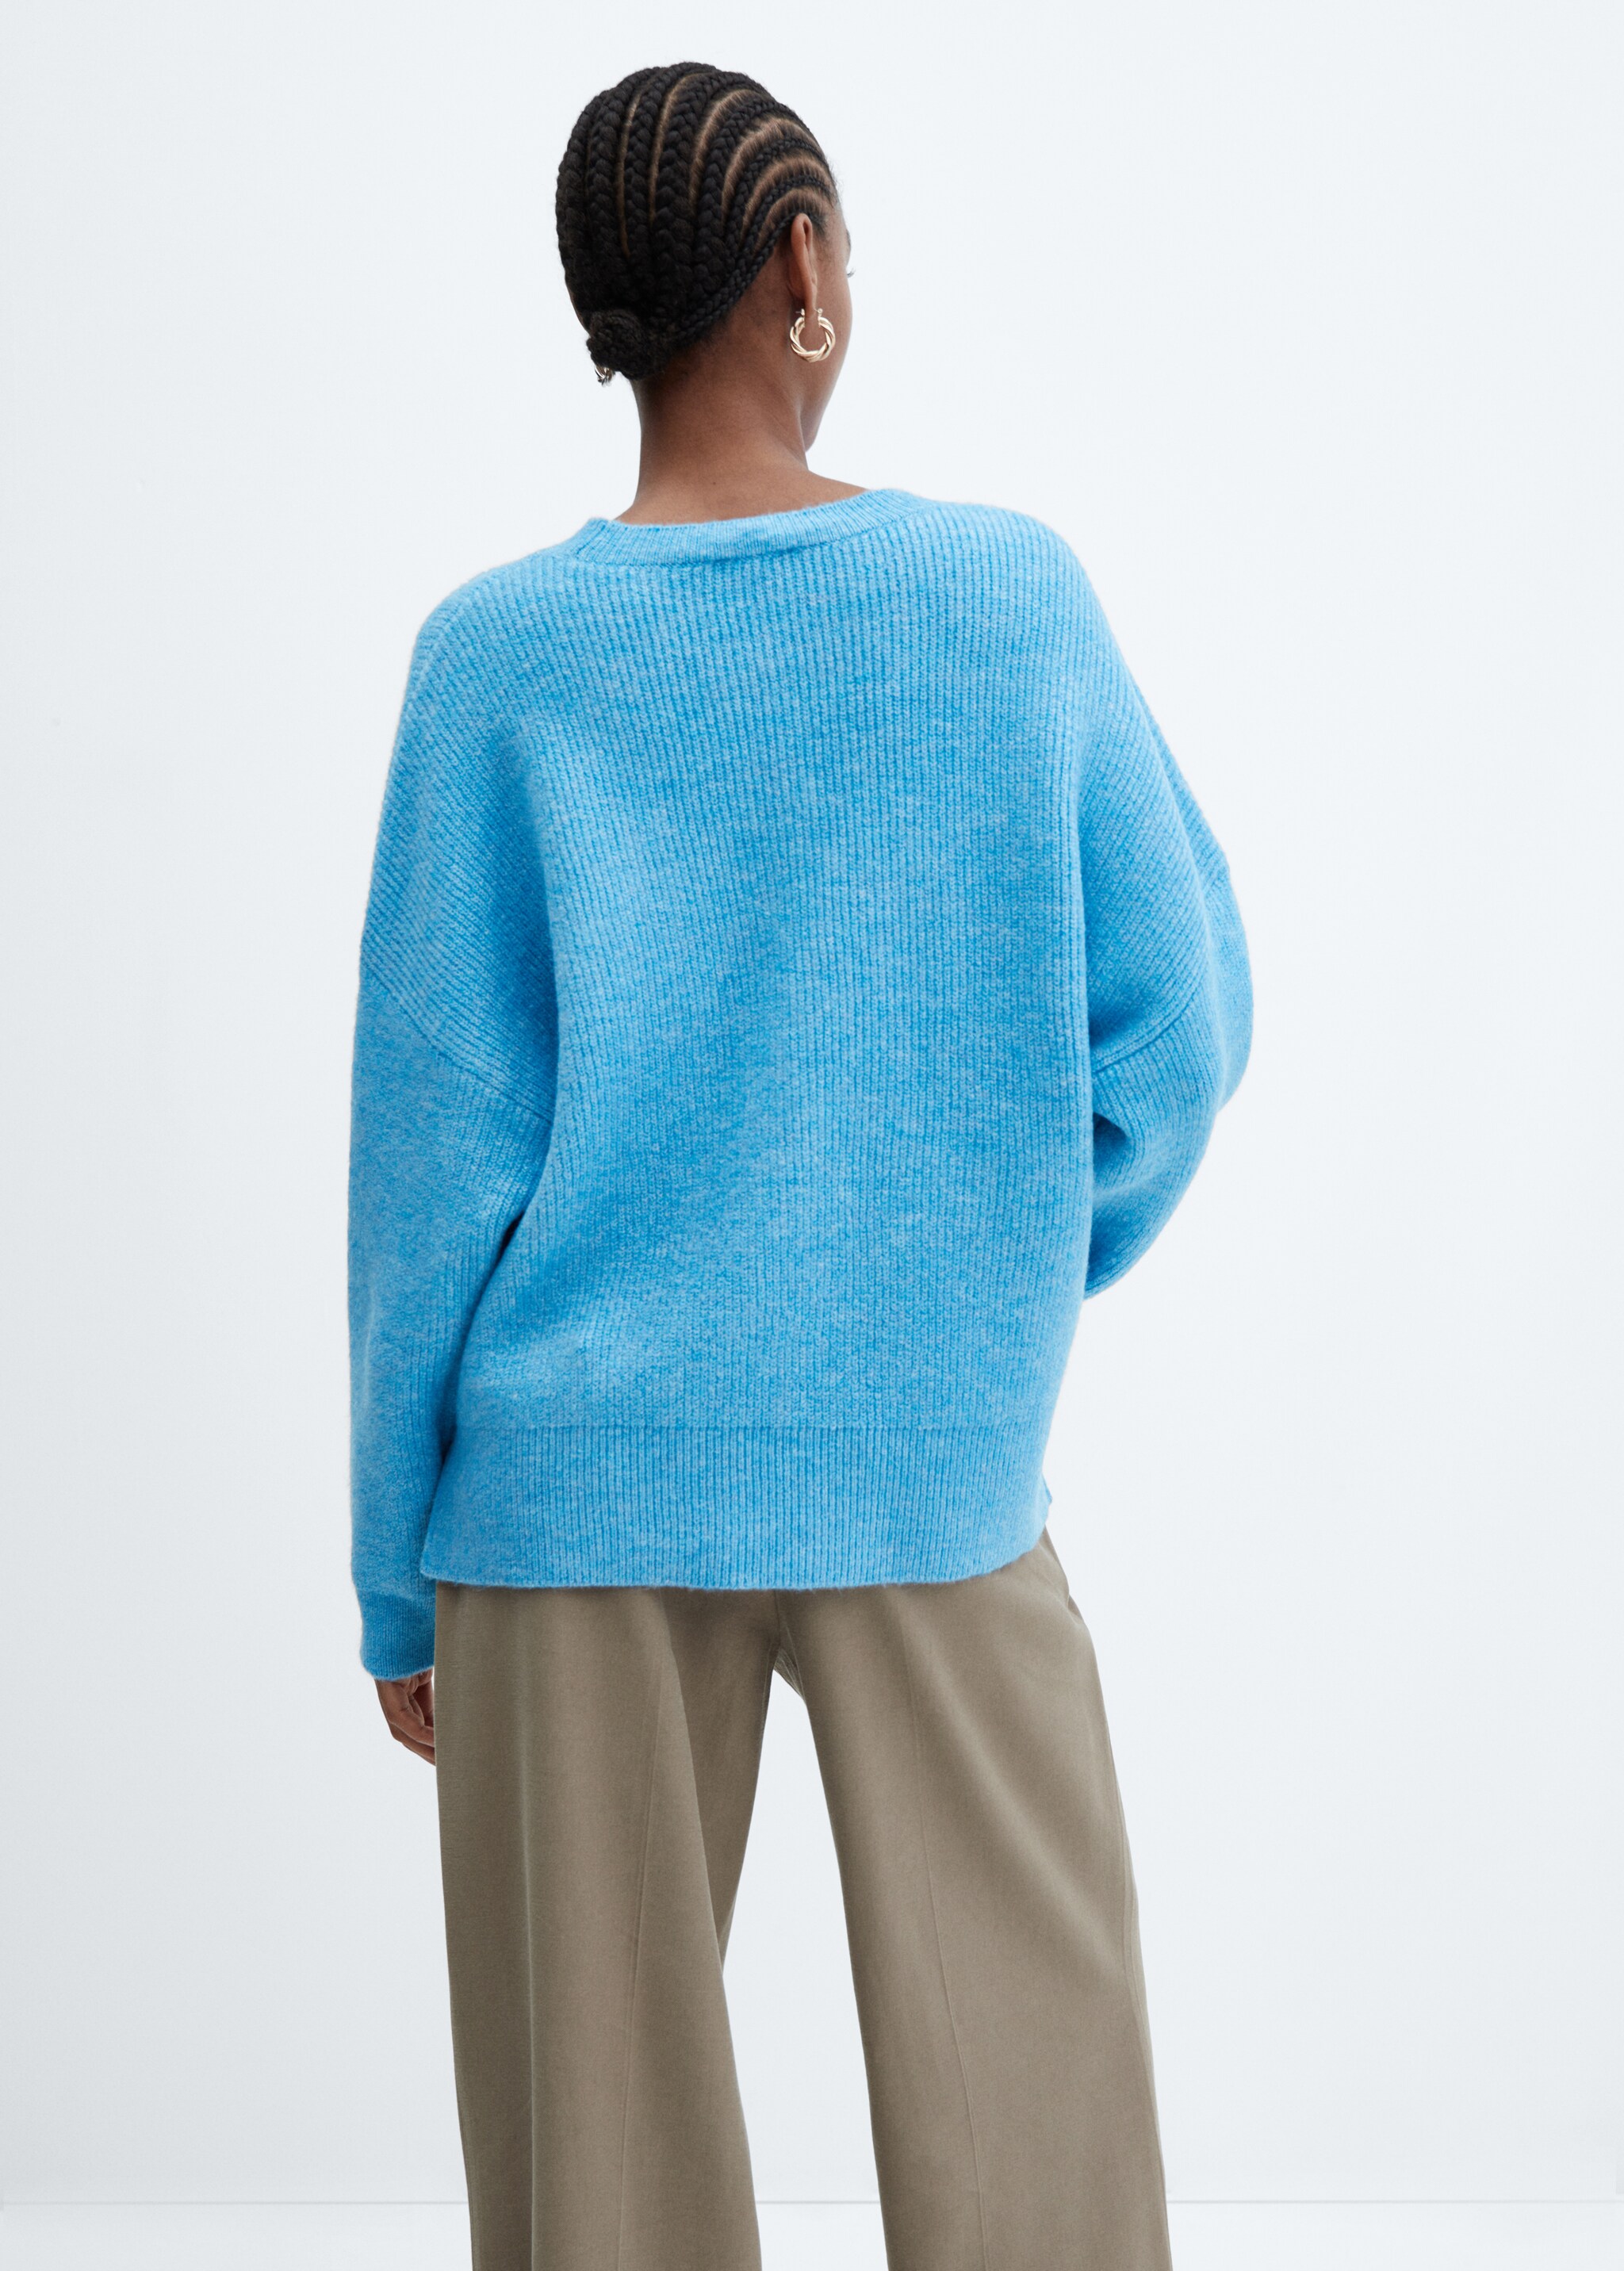 Oversized sweater with dropped shoulders - Reverse of the article